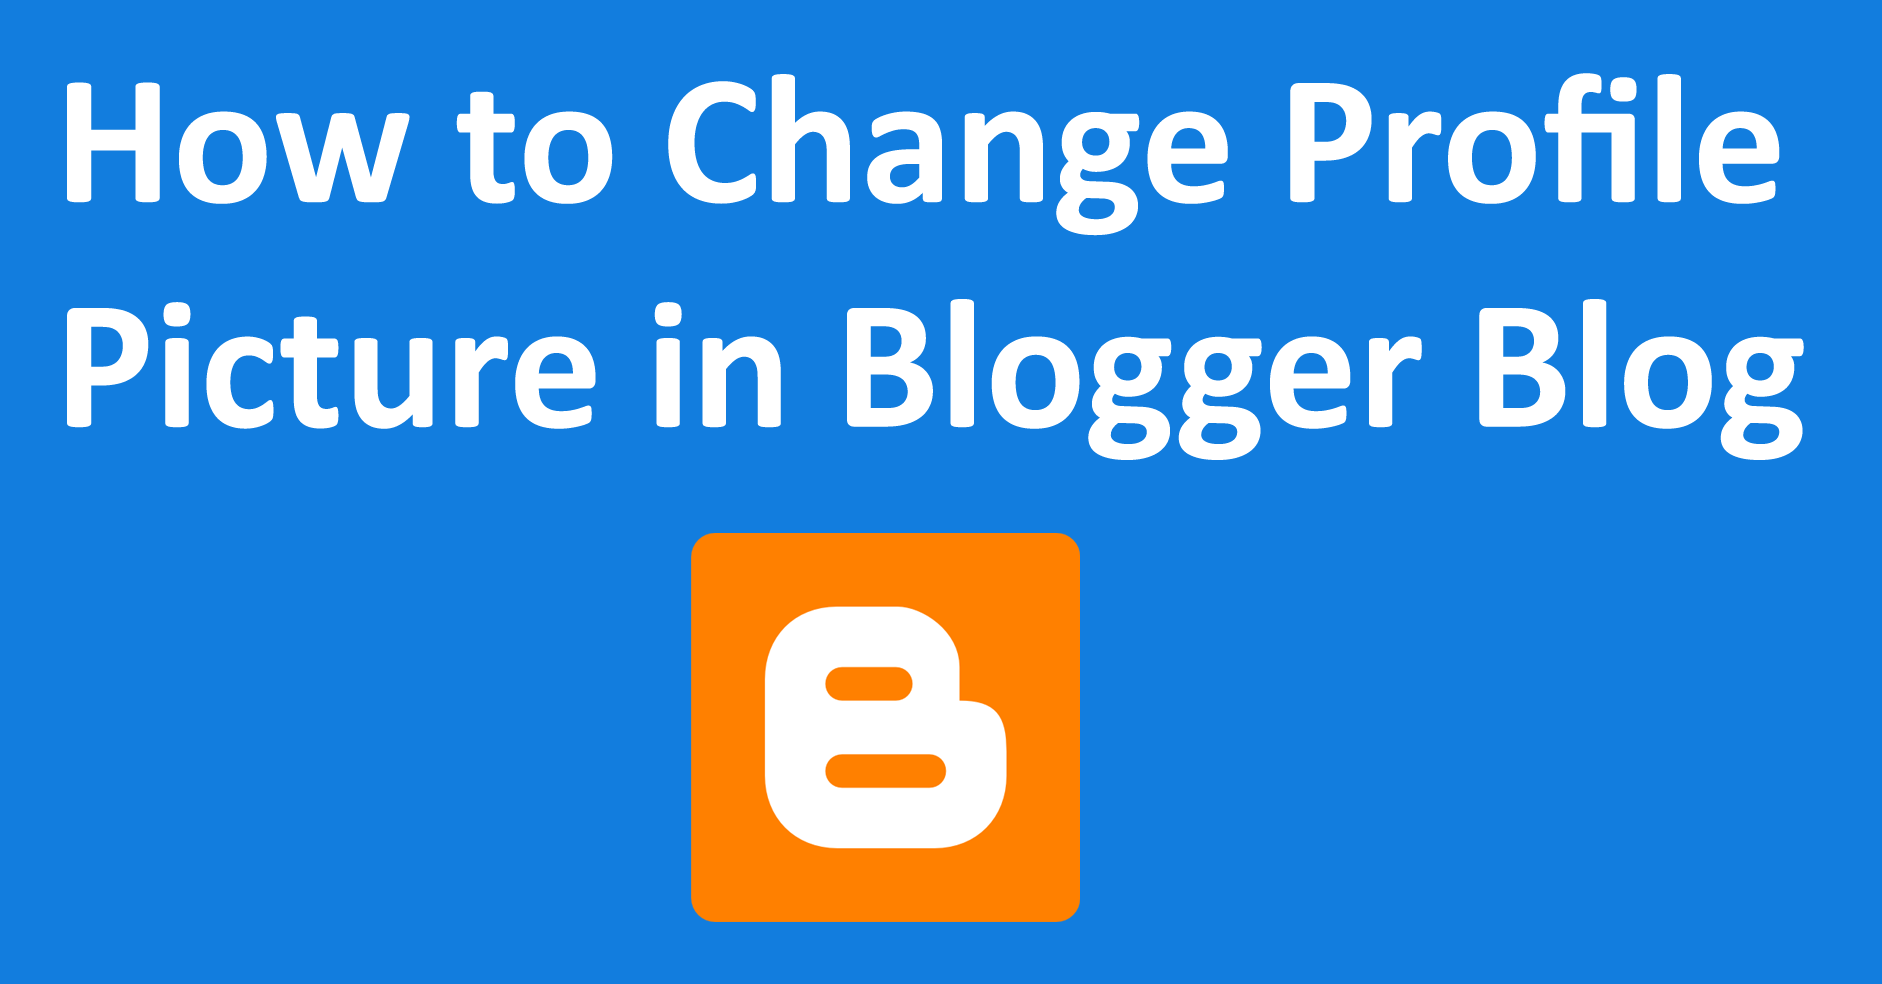 How to Change Profile Picture in Blogger